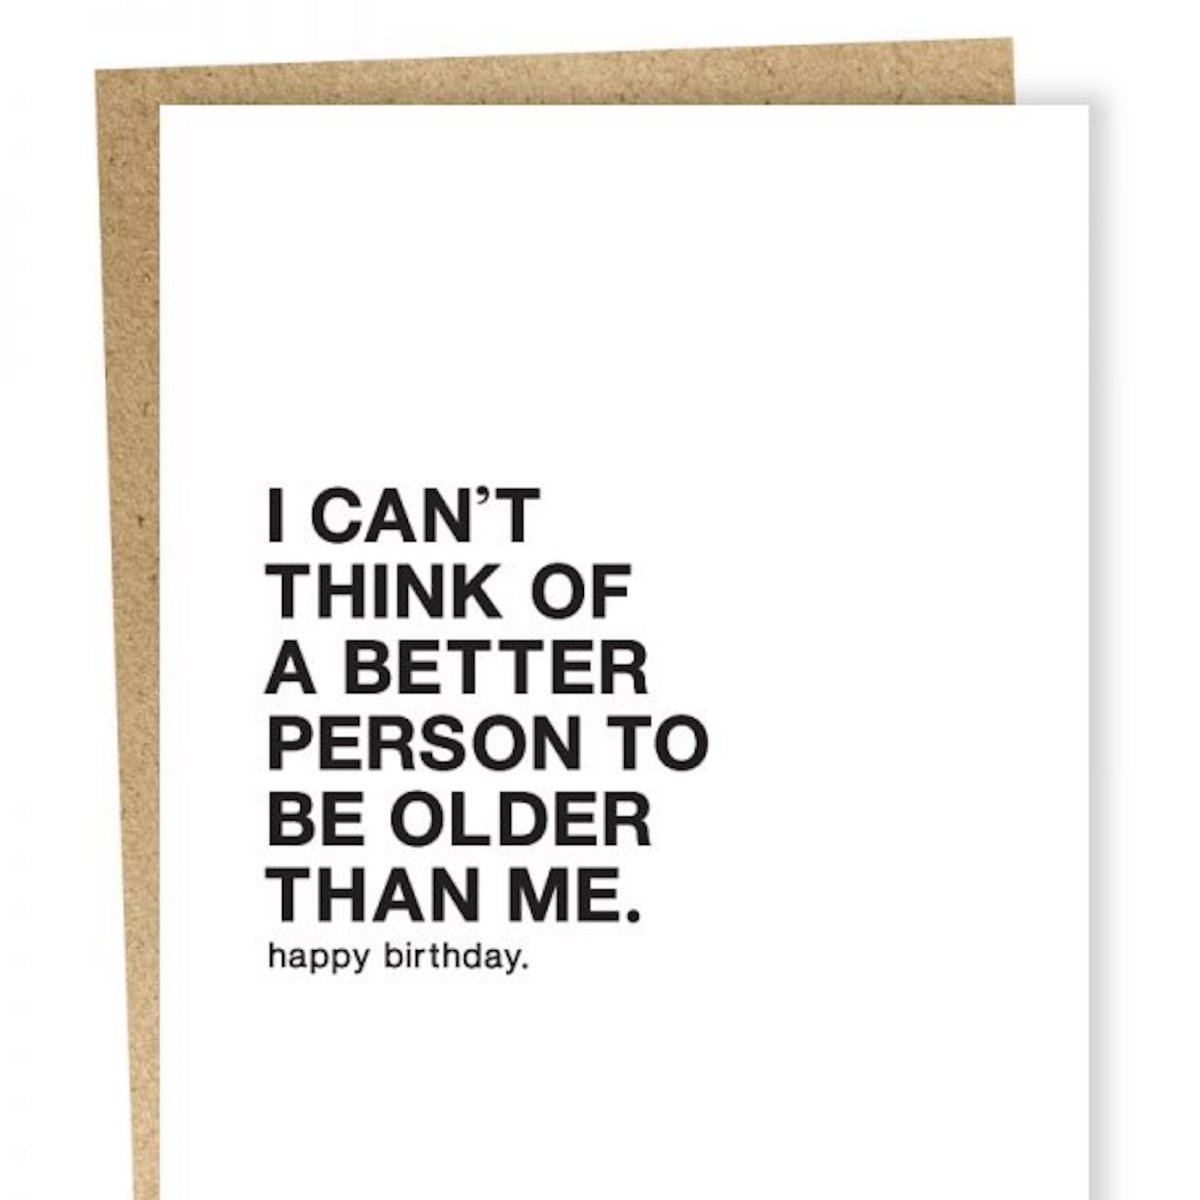 Kraft card with black text that reads: "I CAN'T THINK OF A BETTER PERSON TO BE OLDER THAN ME. HAPPY BIRTHDAY." Comes with a brown Kraft envelope. Designed by Sapling Press and made in Pittsburgh, PA.